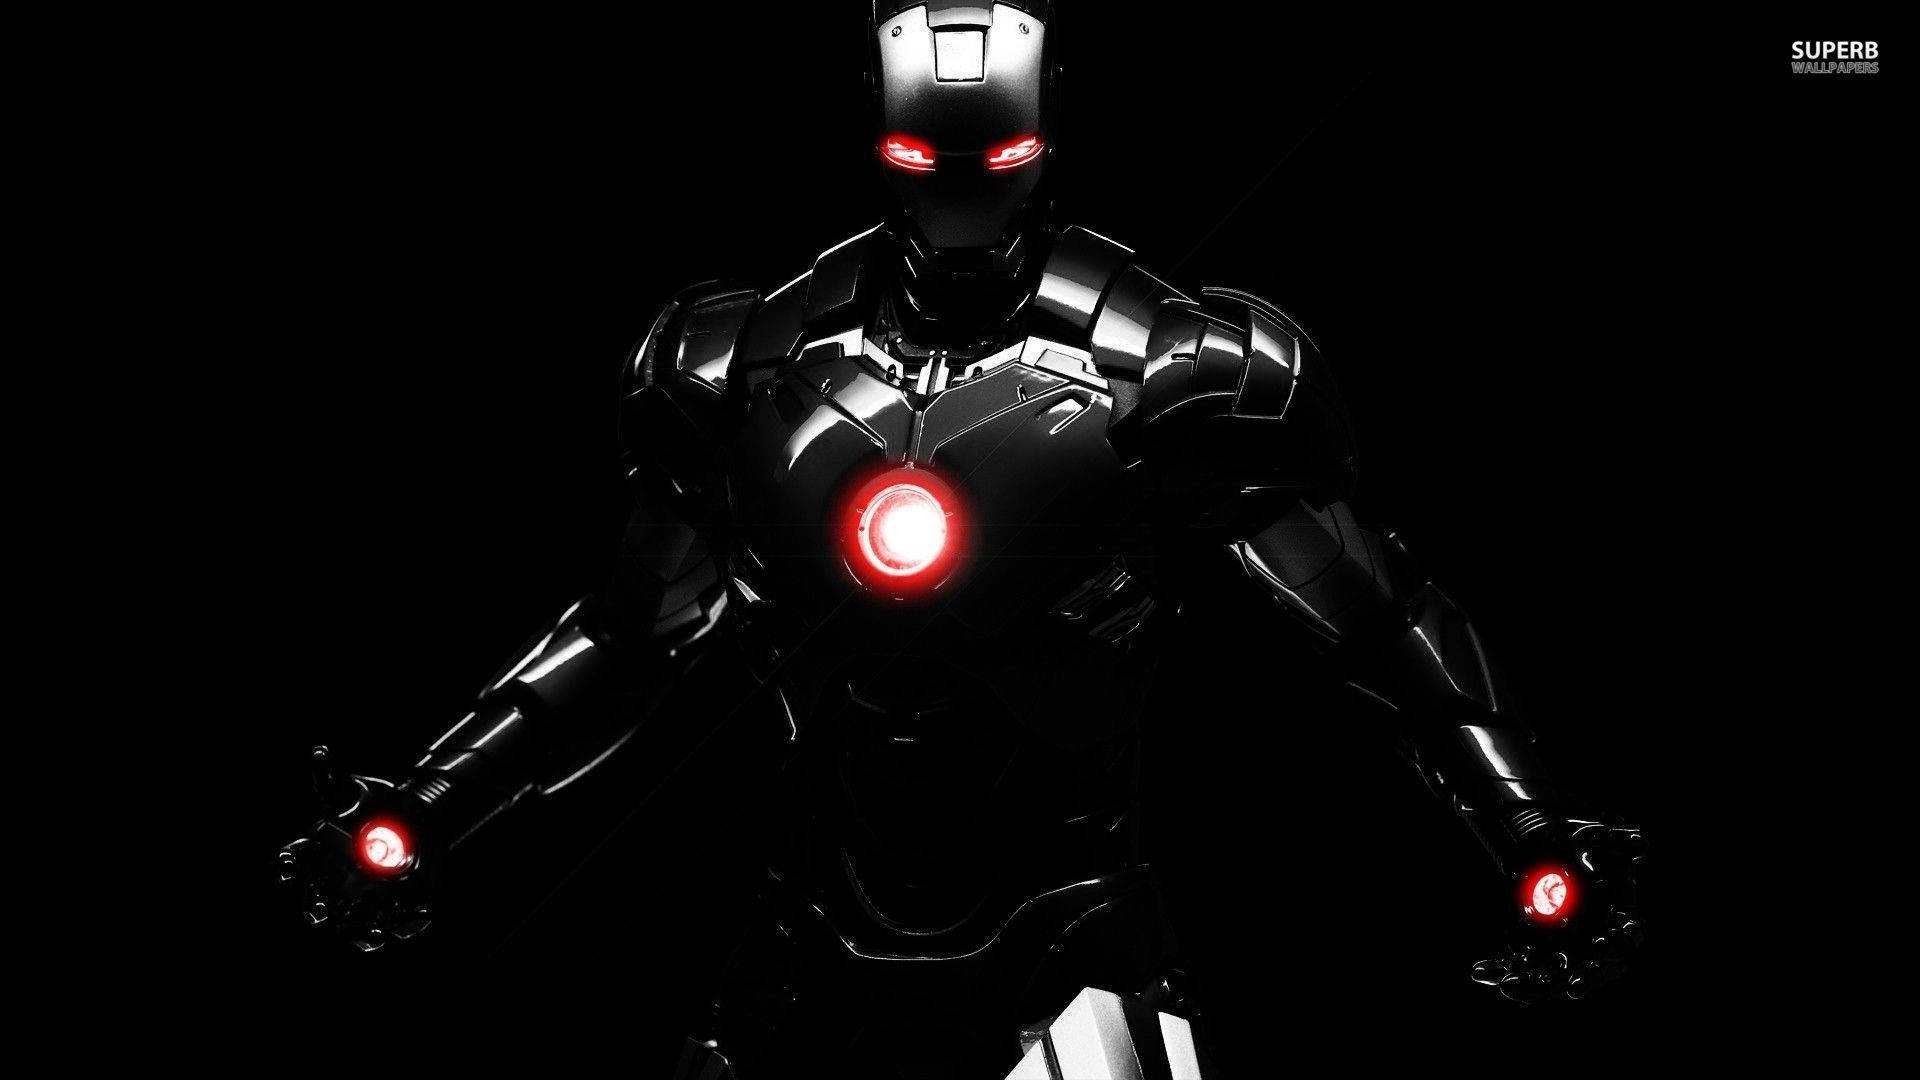 Cool Iron Man Suit In Black Background